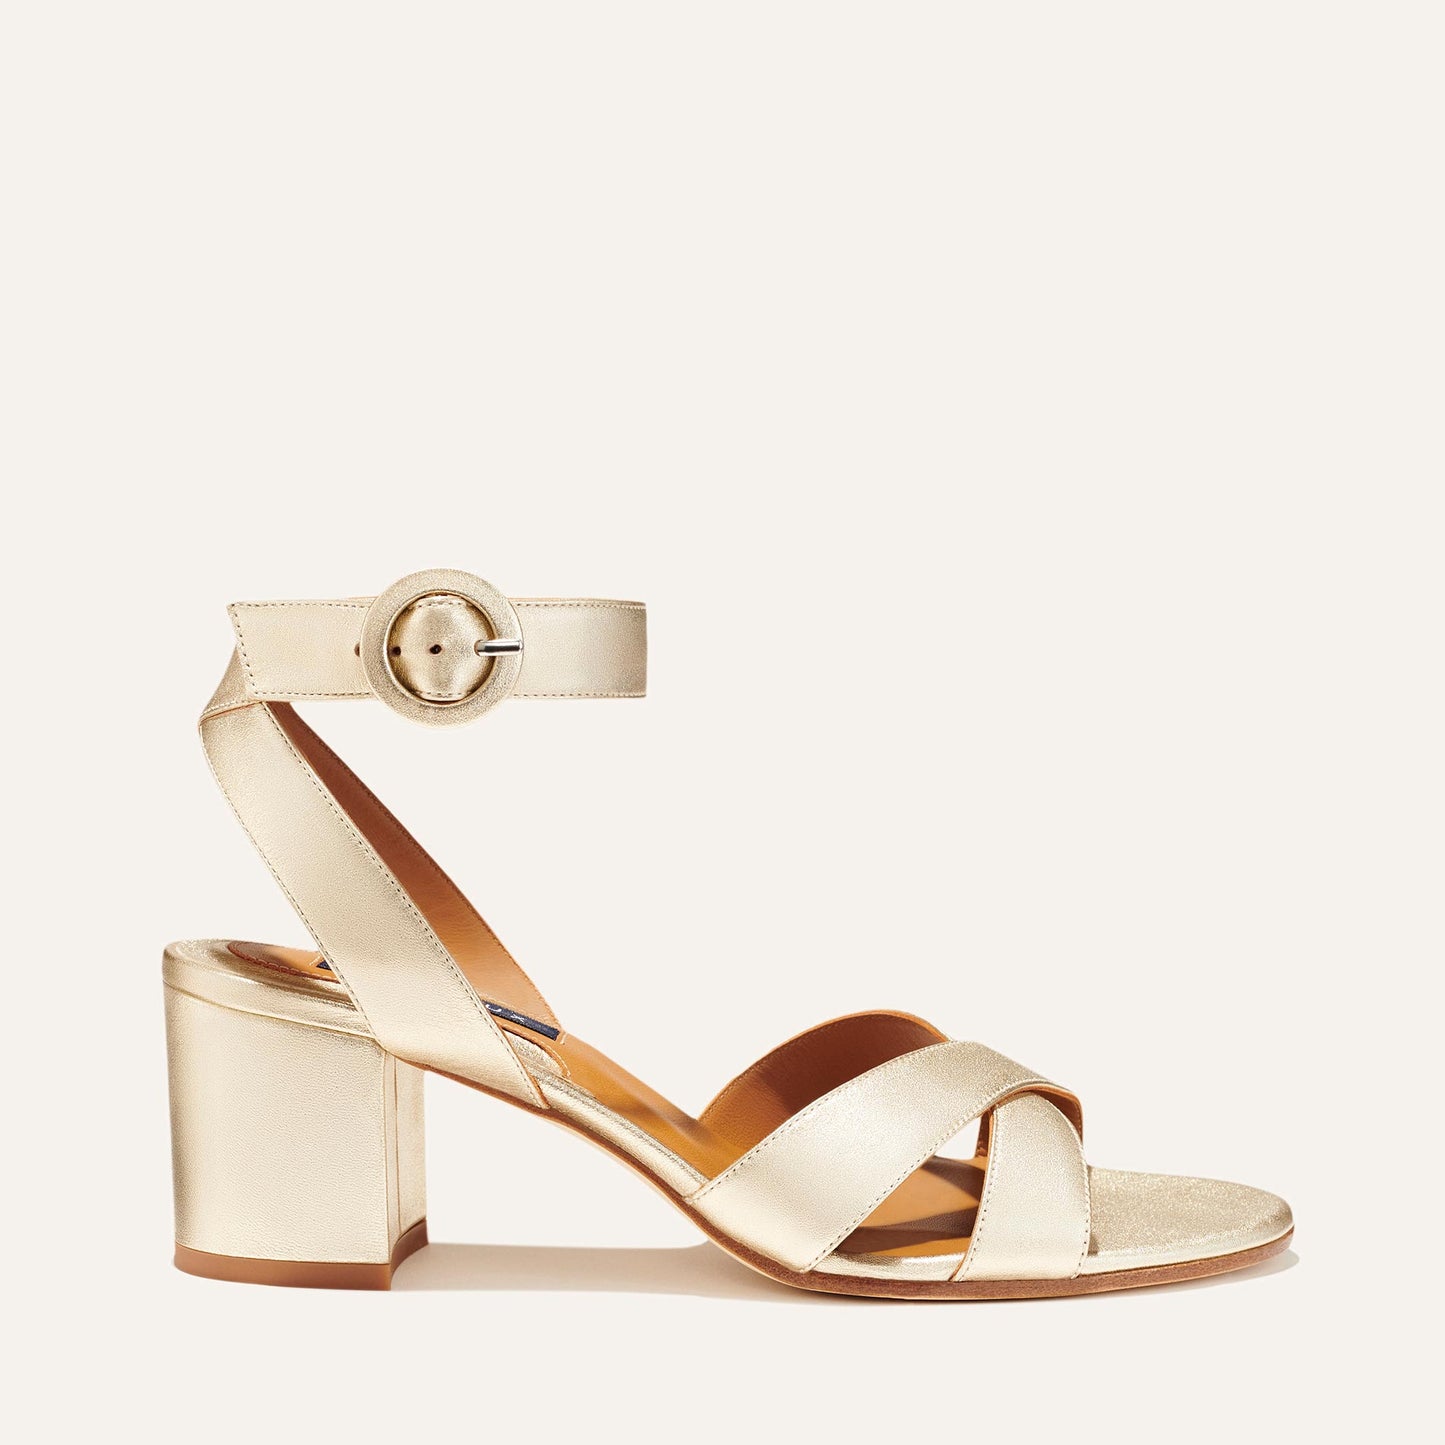 Margaux's classic City Sandal in metallic champagne nappa leather with comfortable straps and a walkable block heel